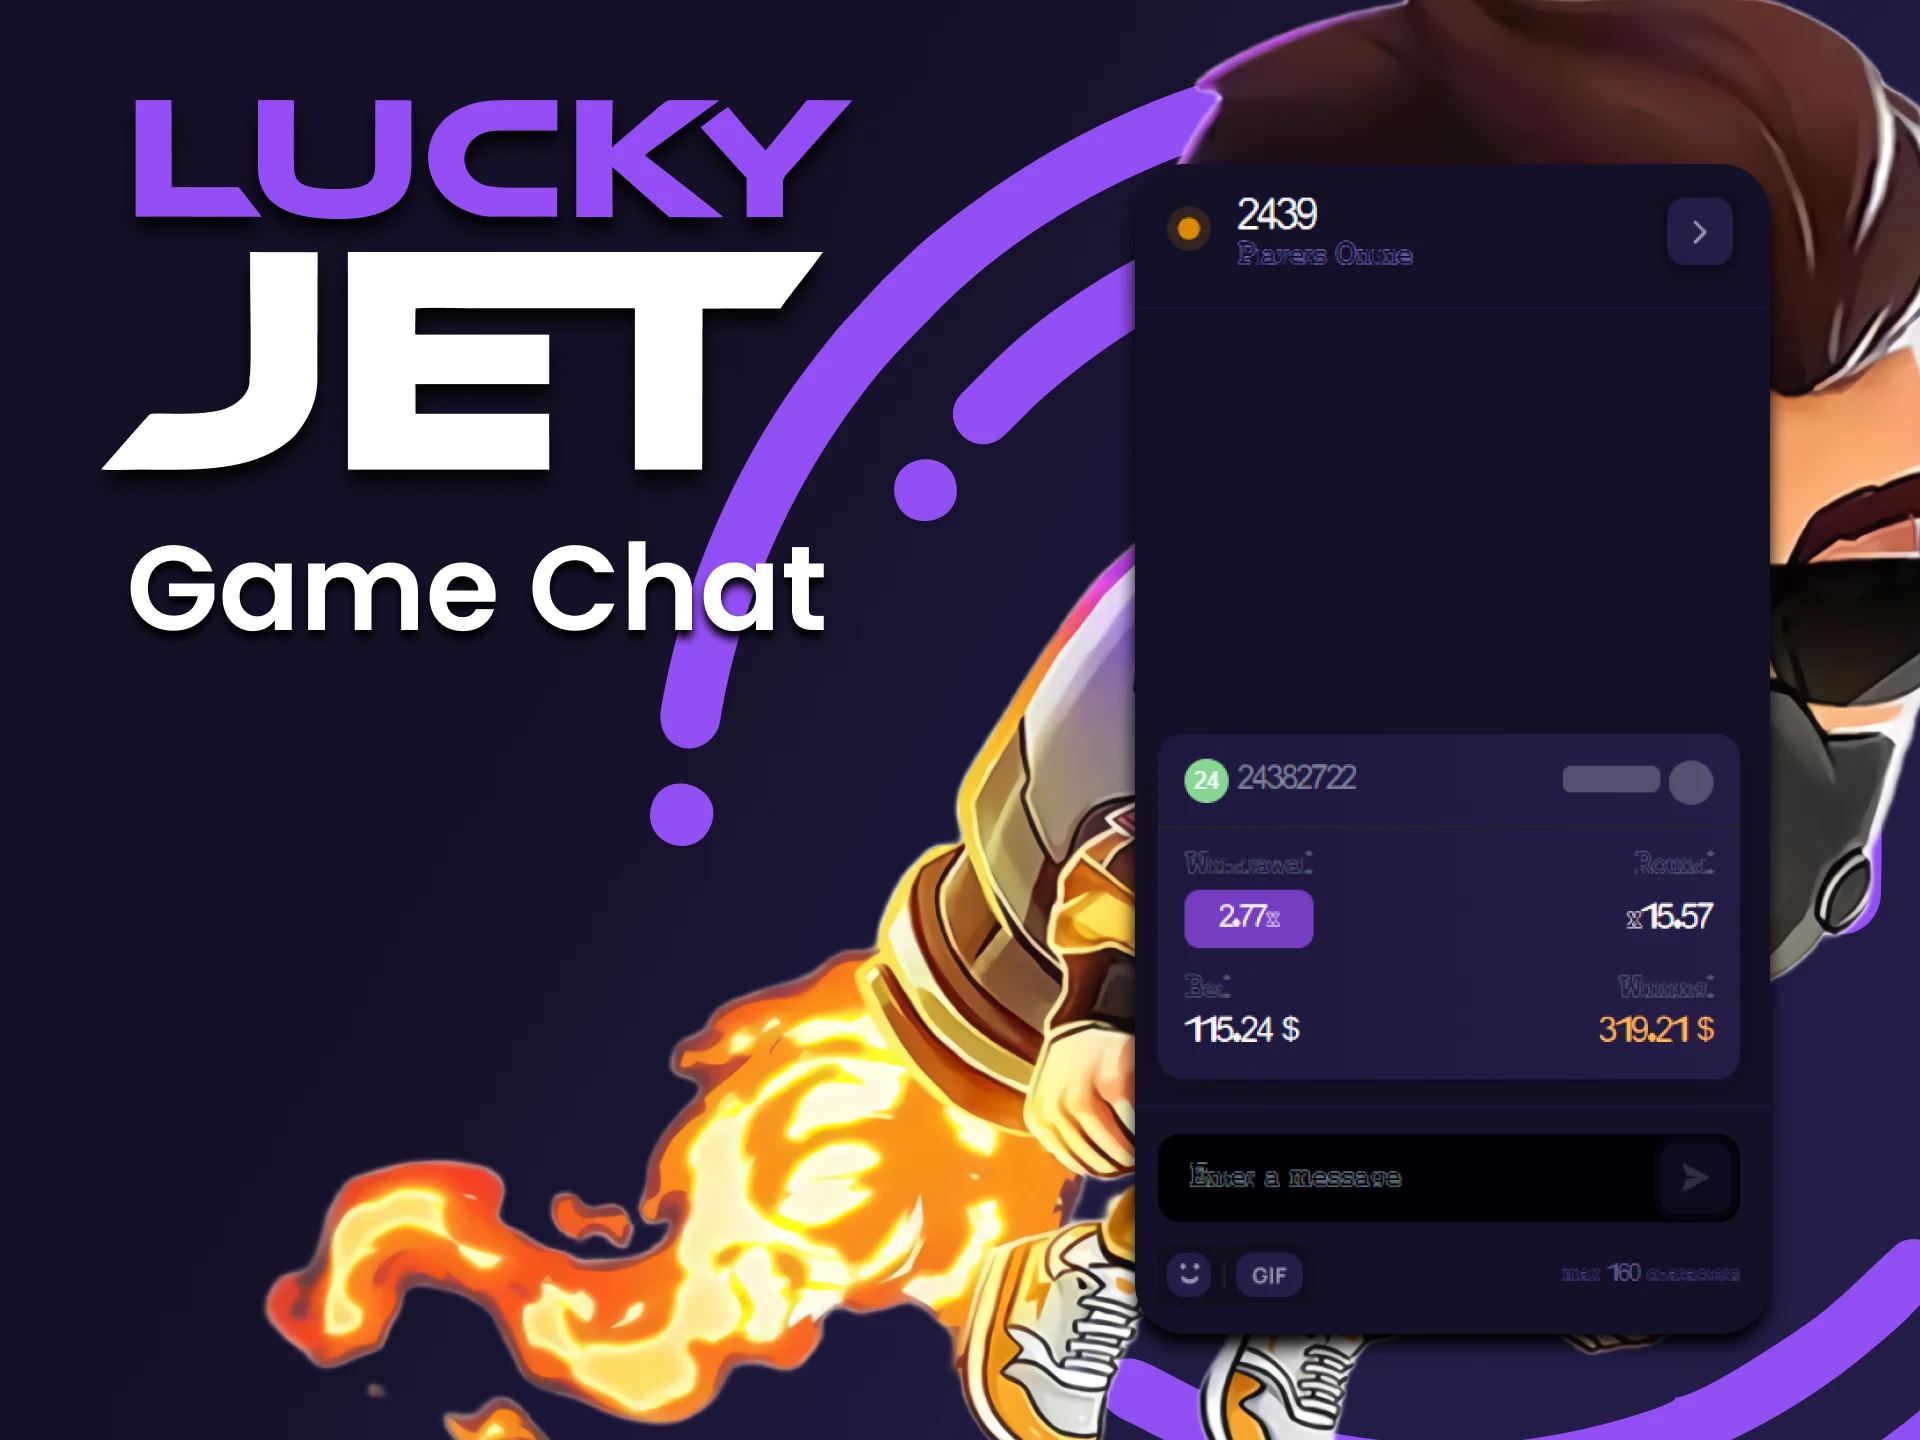 You can always chat with players in the Lucky Jet chat.